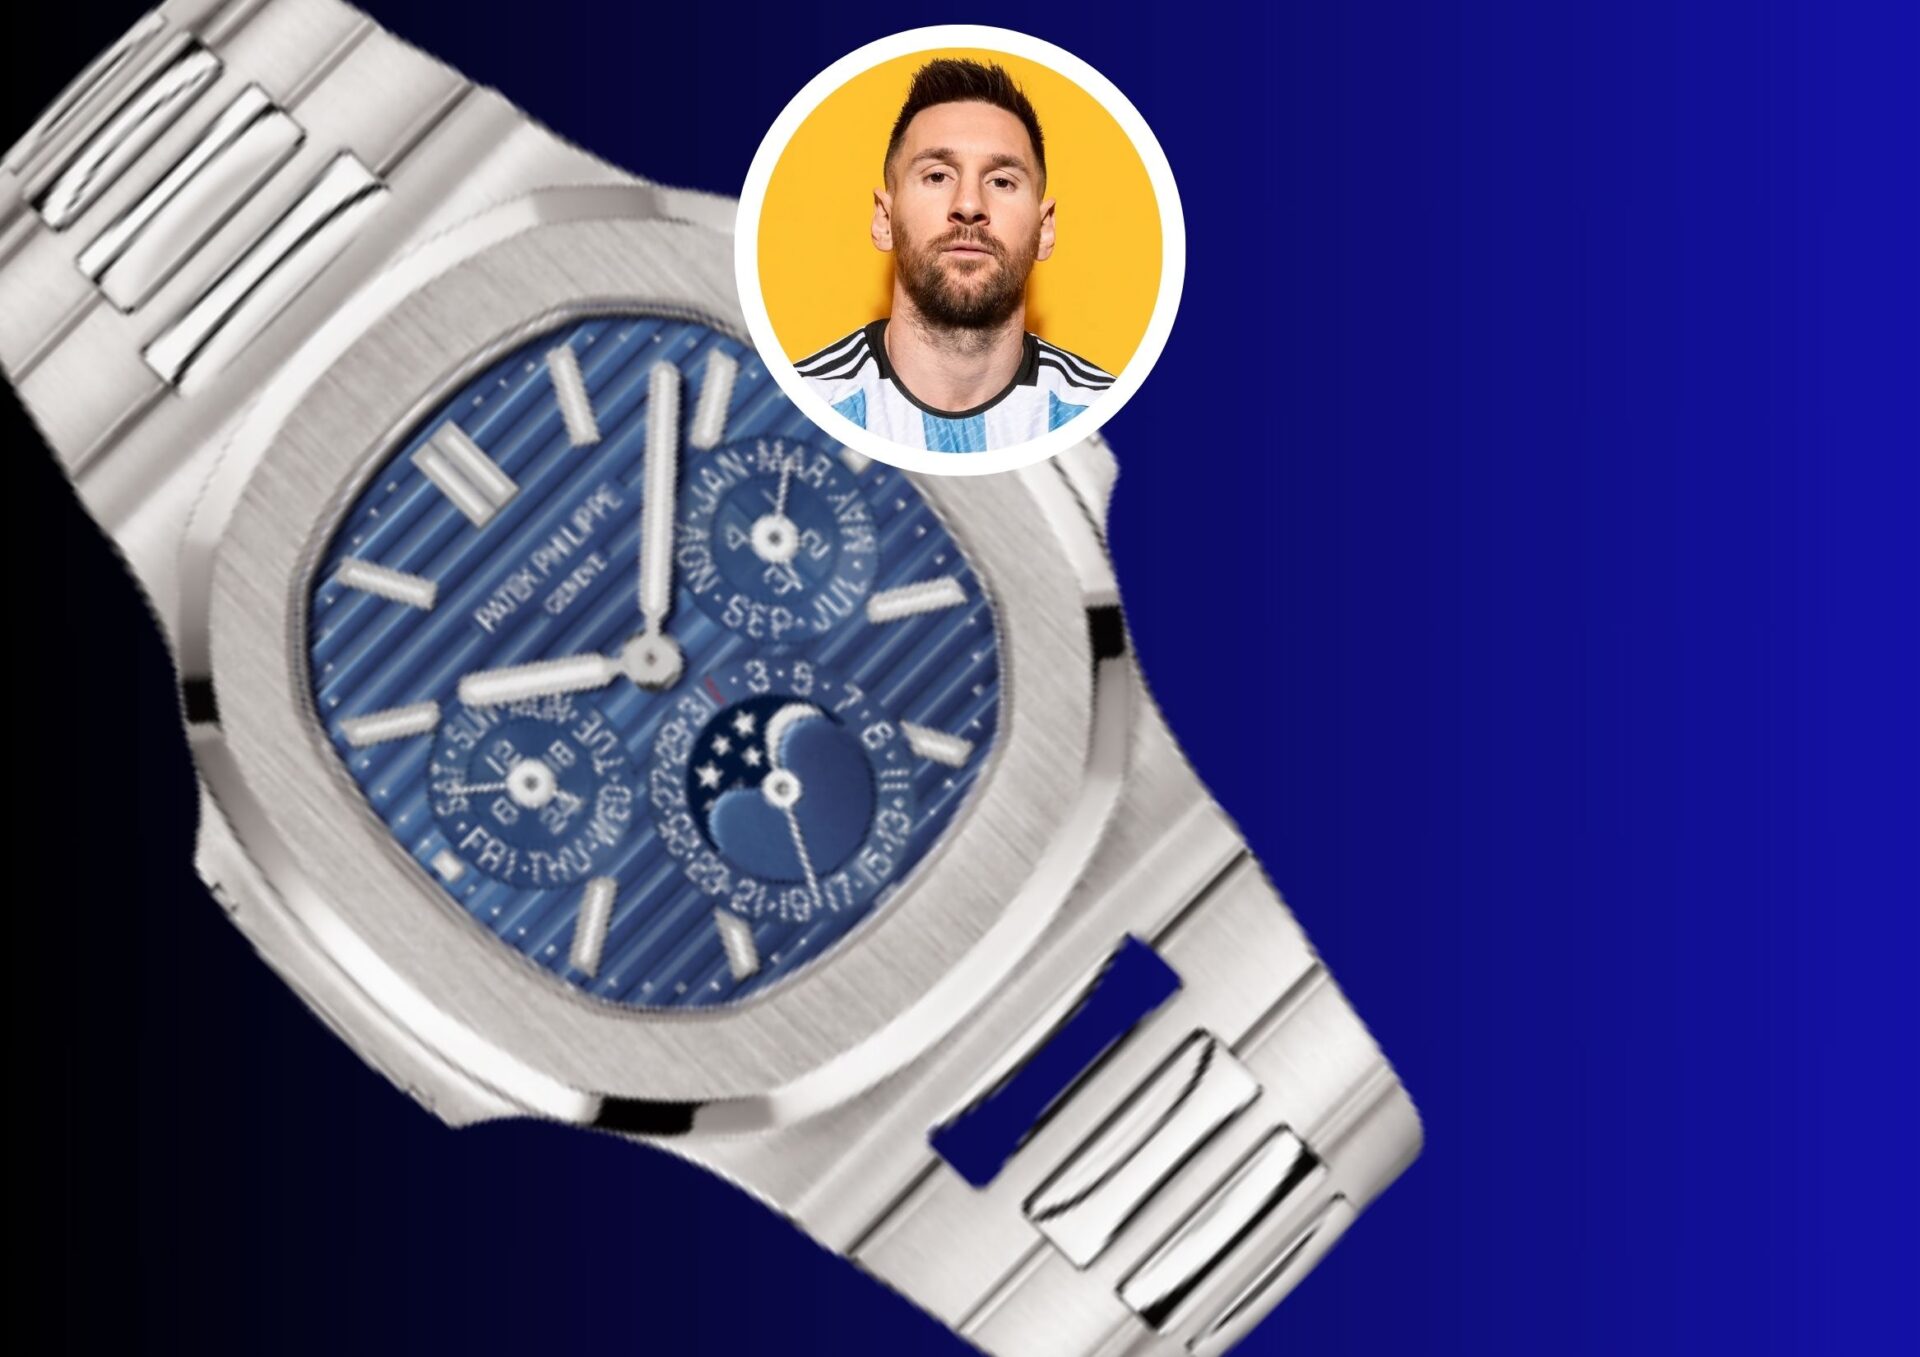 Main Watch Image of Leonel Messi